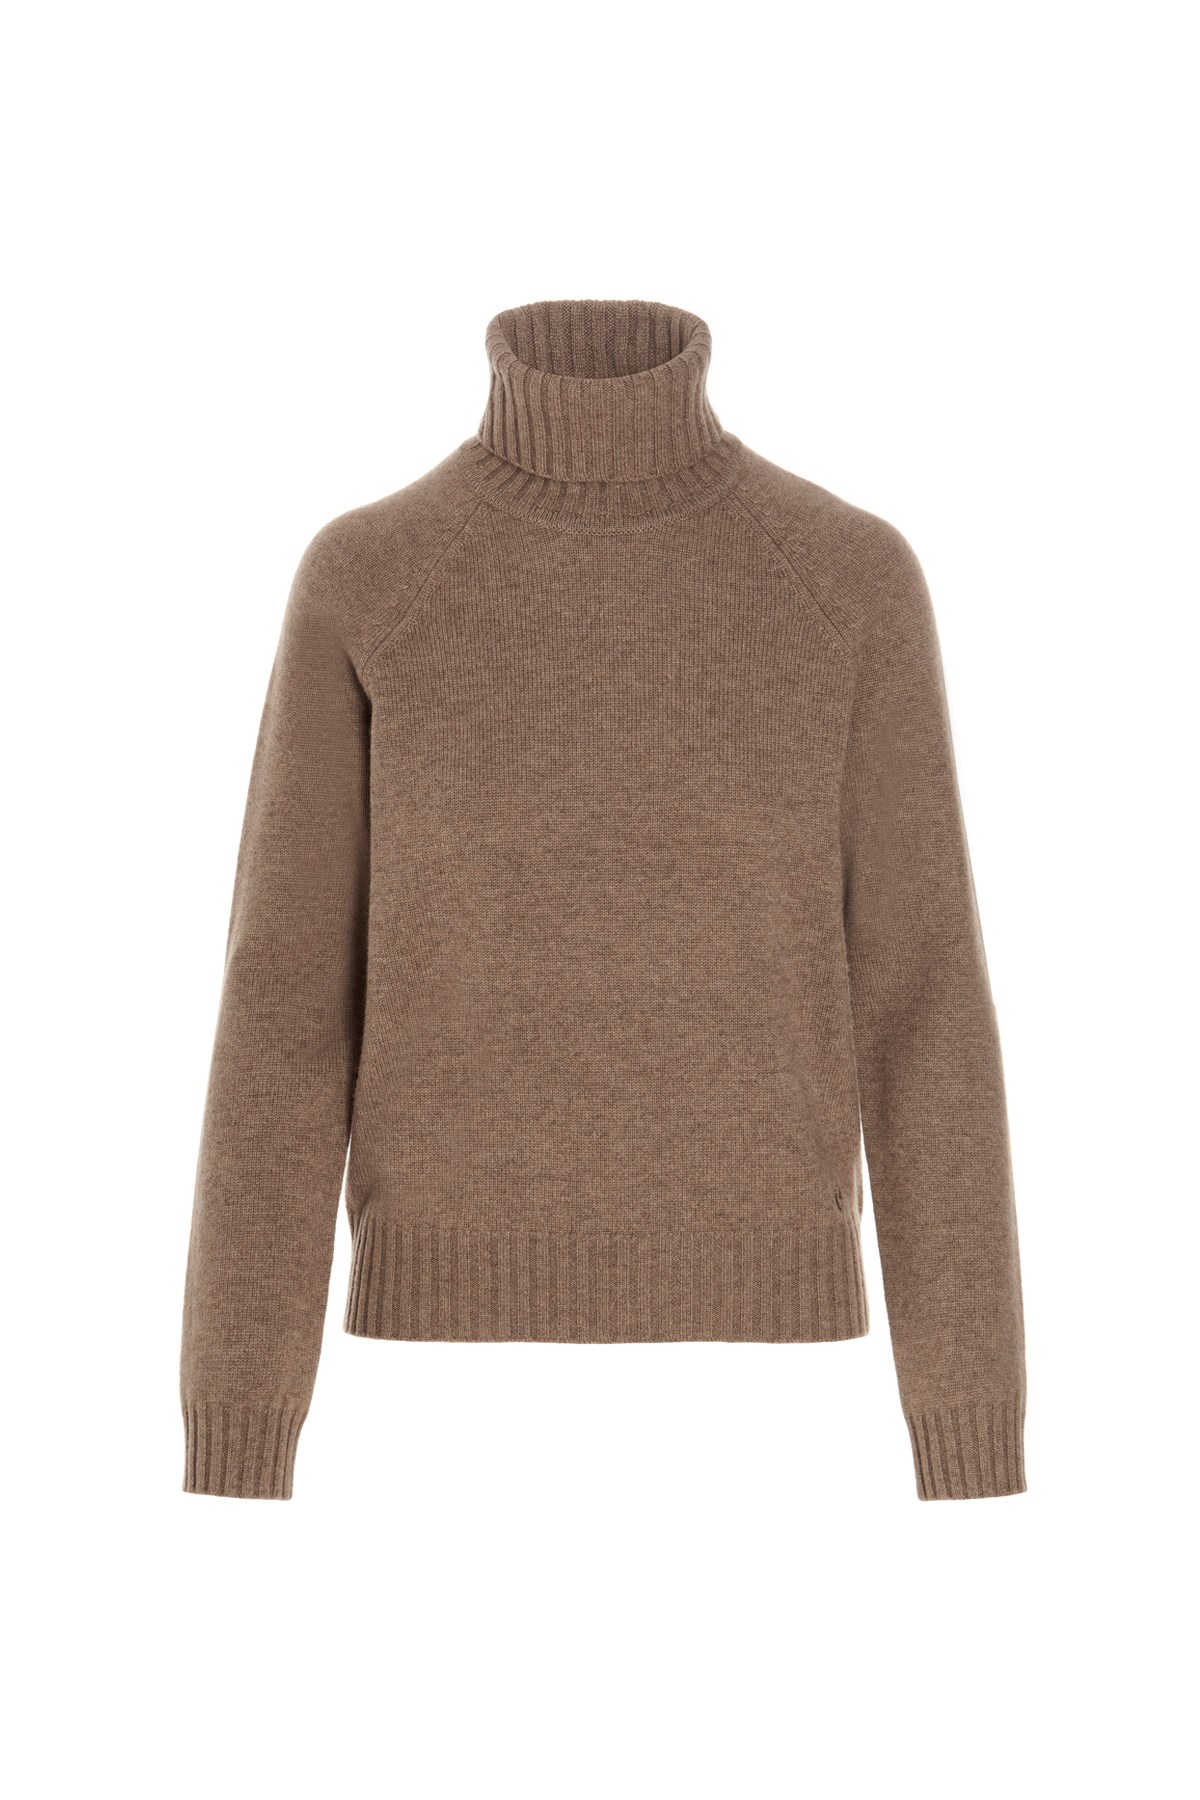 TORY BURCH Polo Neck Cashmere Sweater